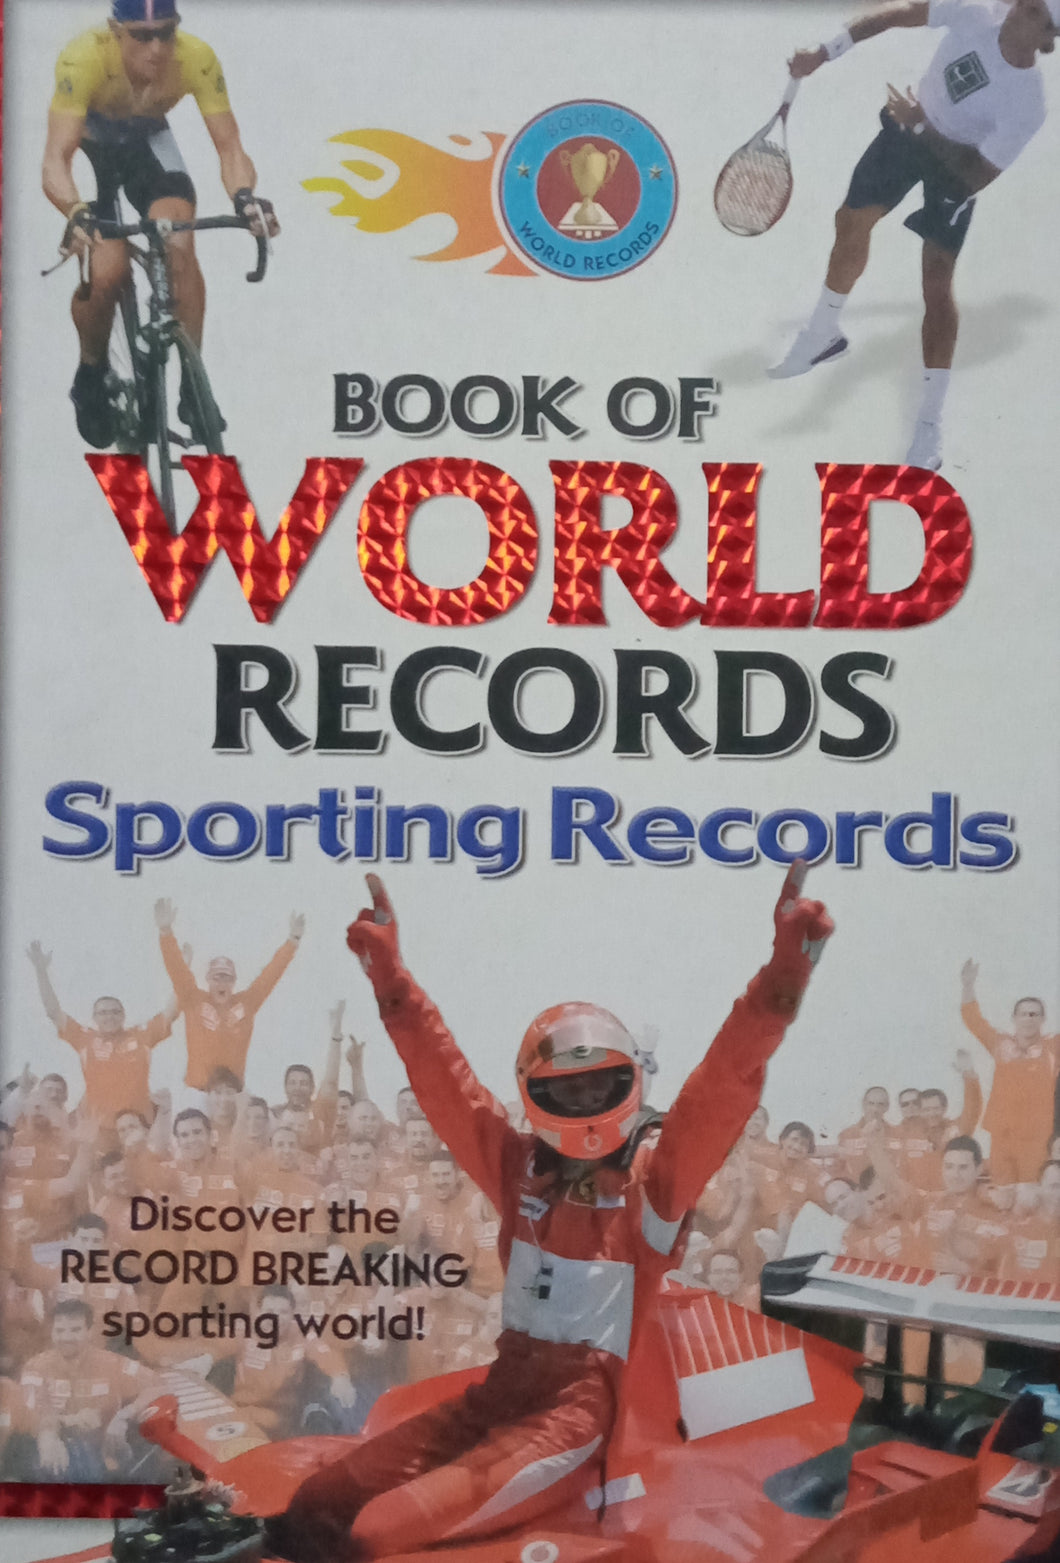 Book Of World Records Sporting Records